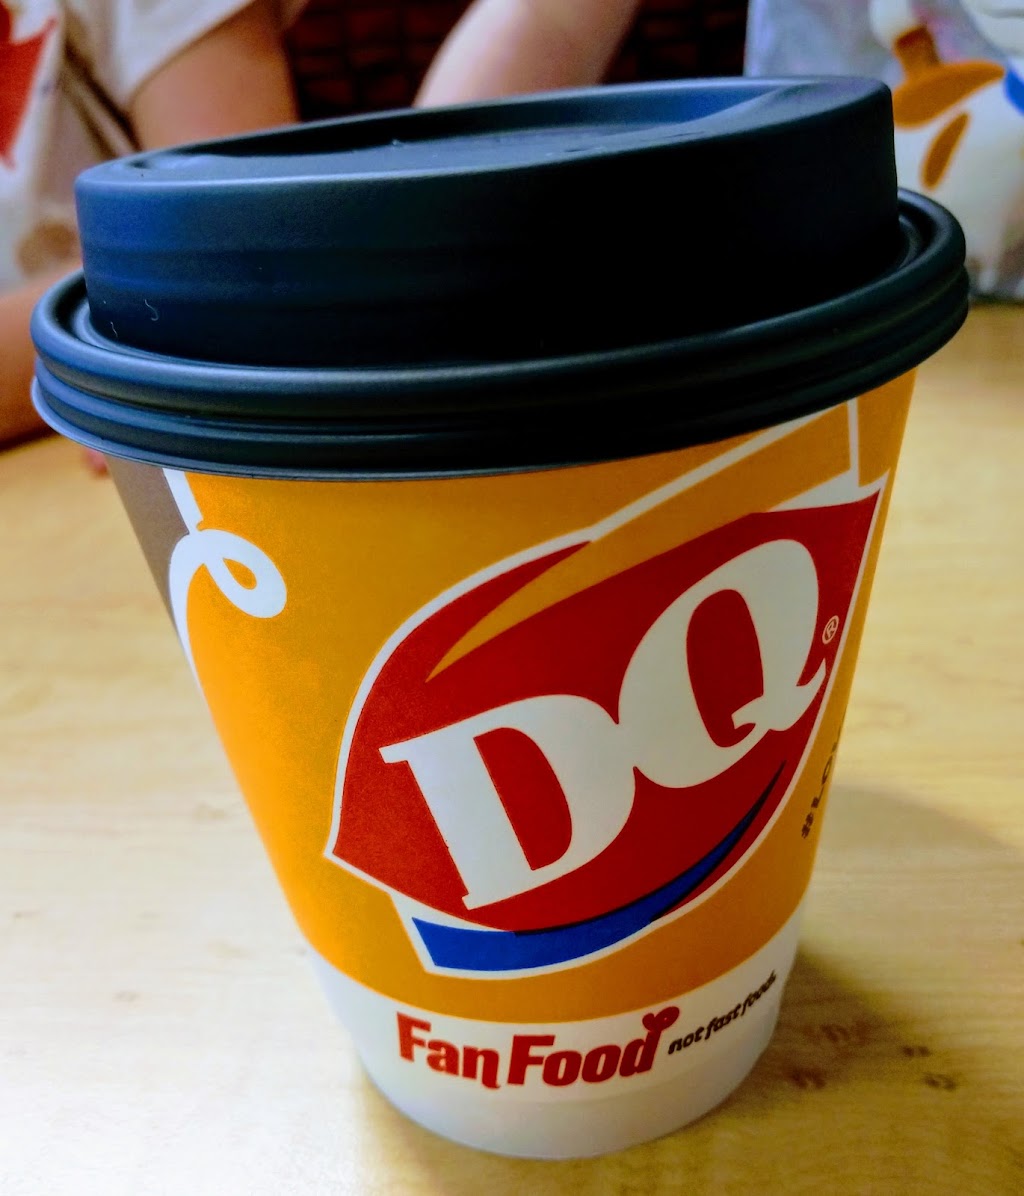 DQ Grill & Chill Restaurant | 7578 State Route 30, Irwin, PA 15642 | Phone: (724) 864-7474